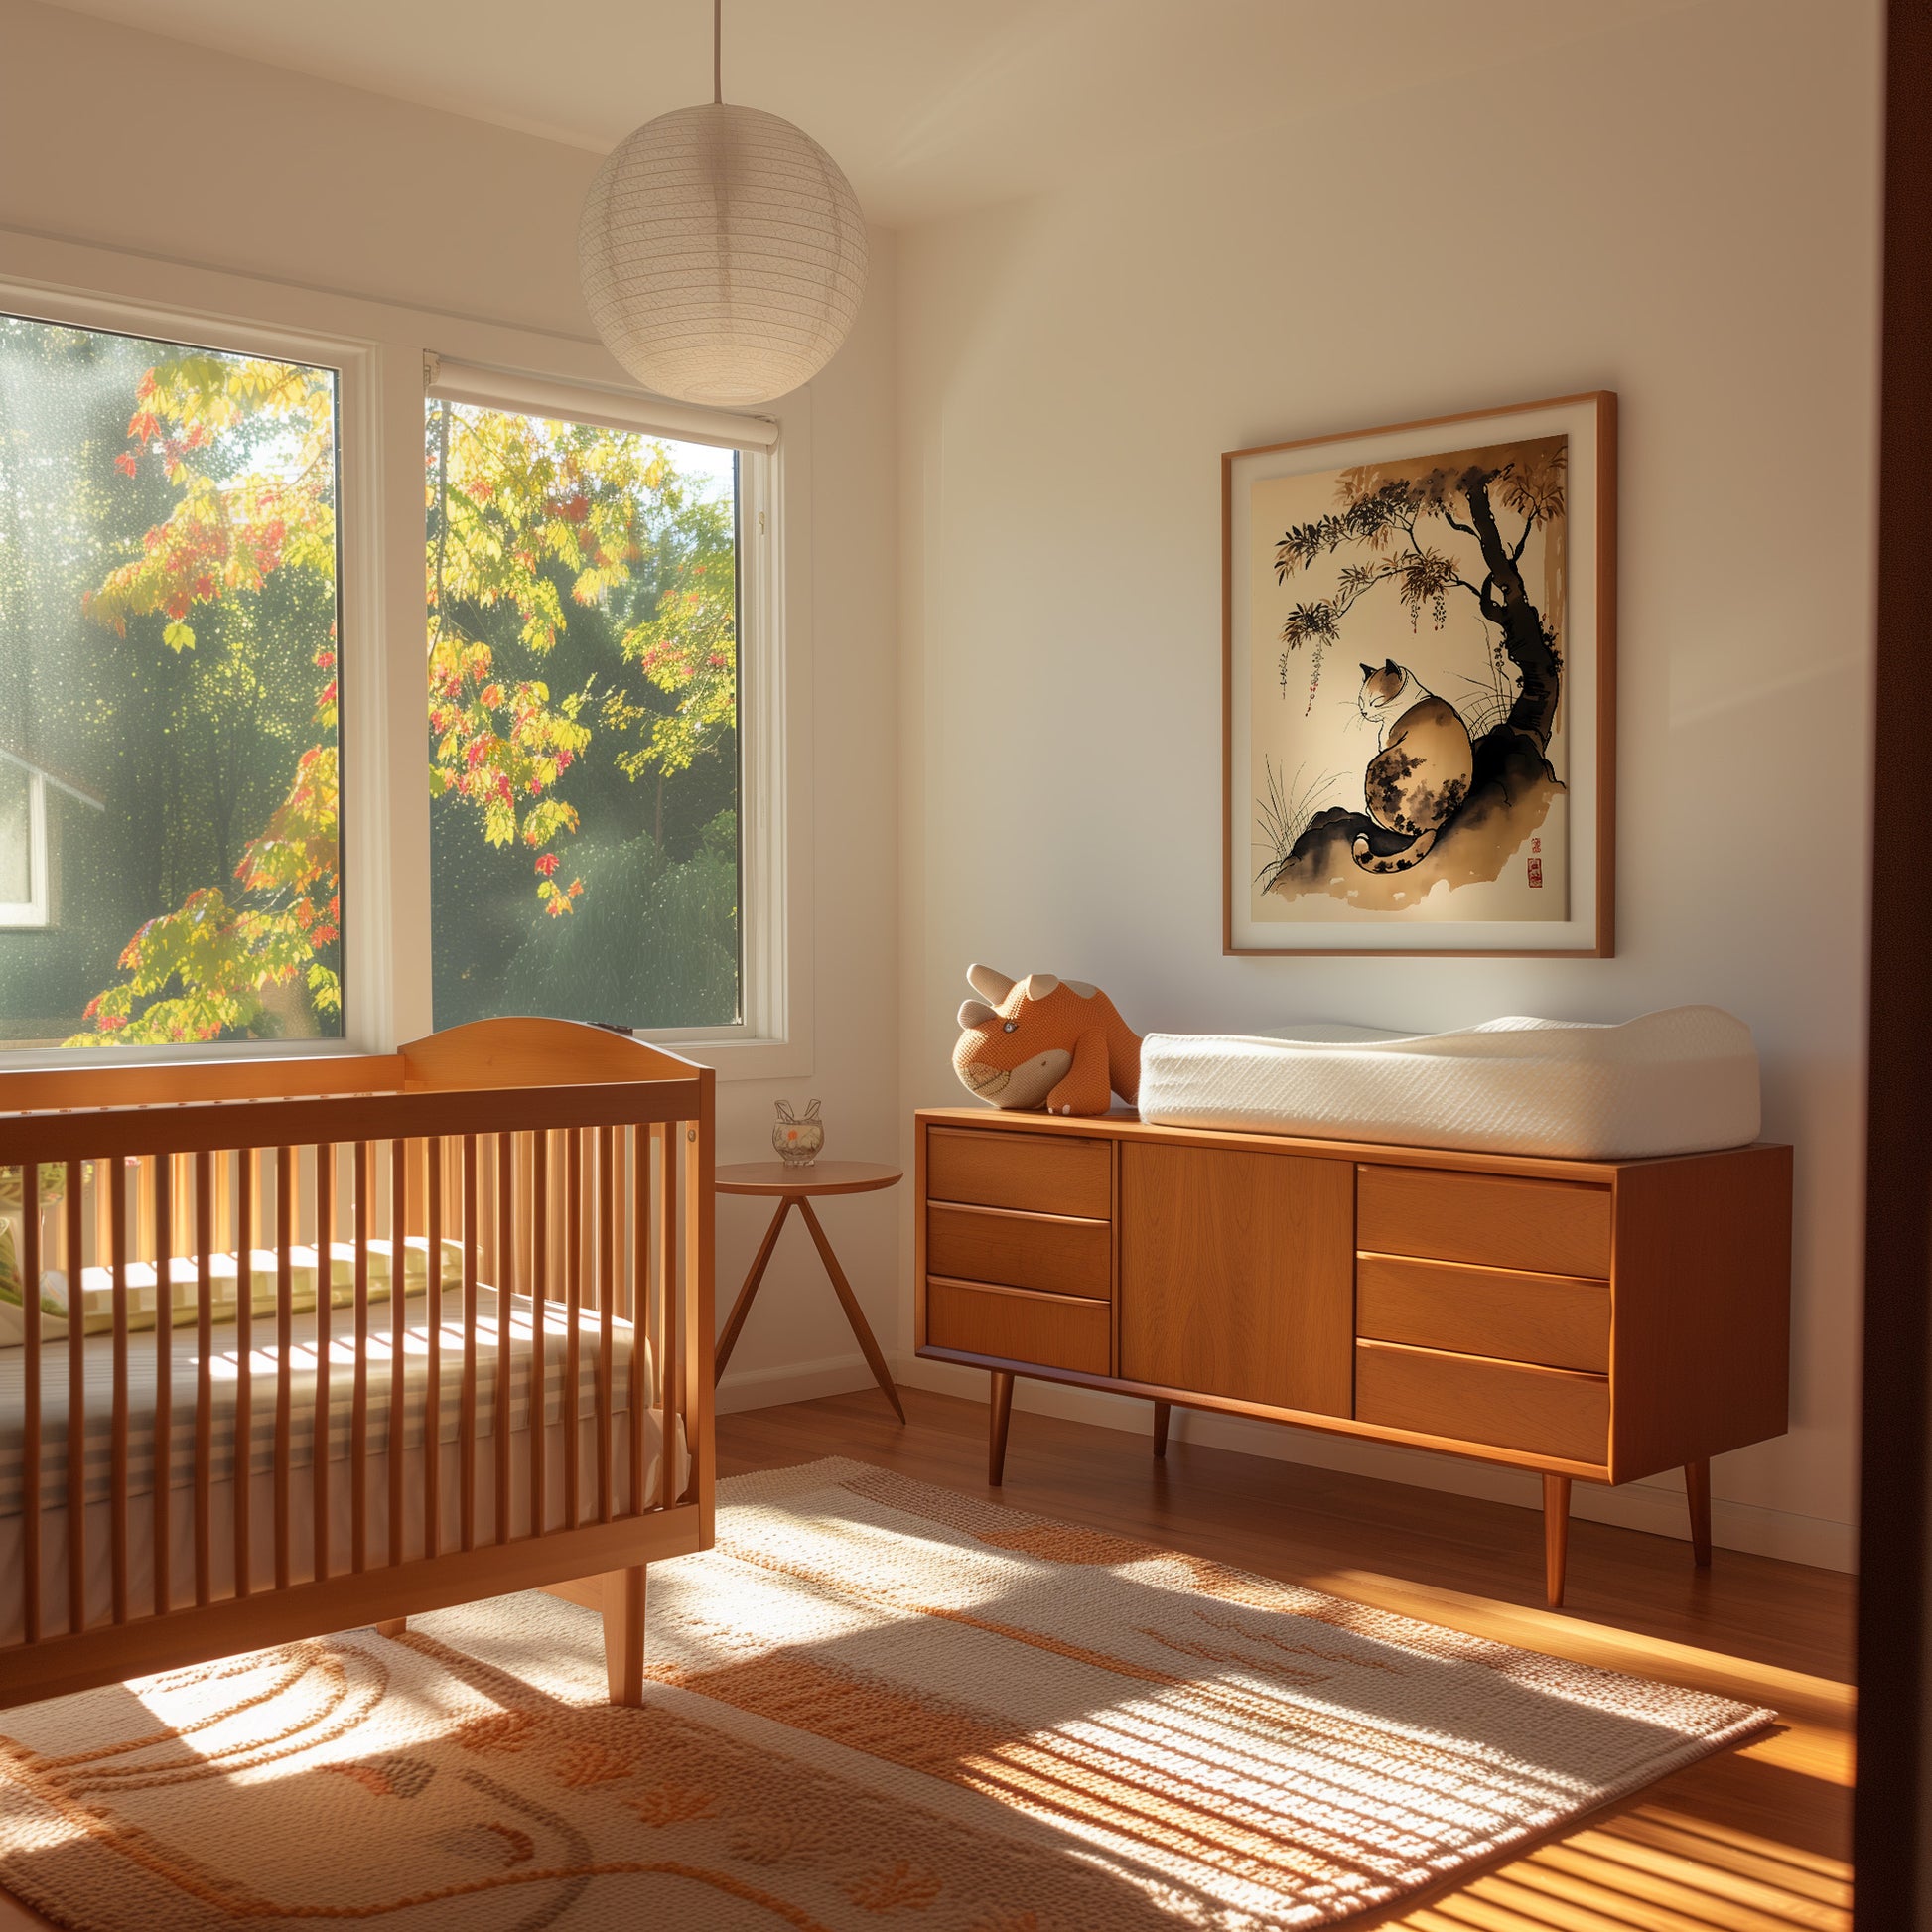 Sunny bedroom with a wooden crib, dresser, and Japanese-style art on the wall.